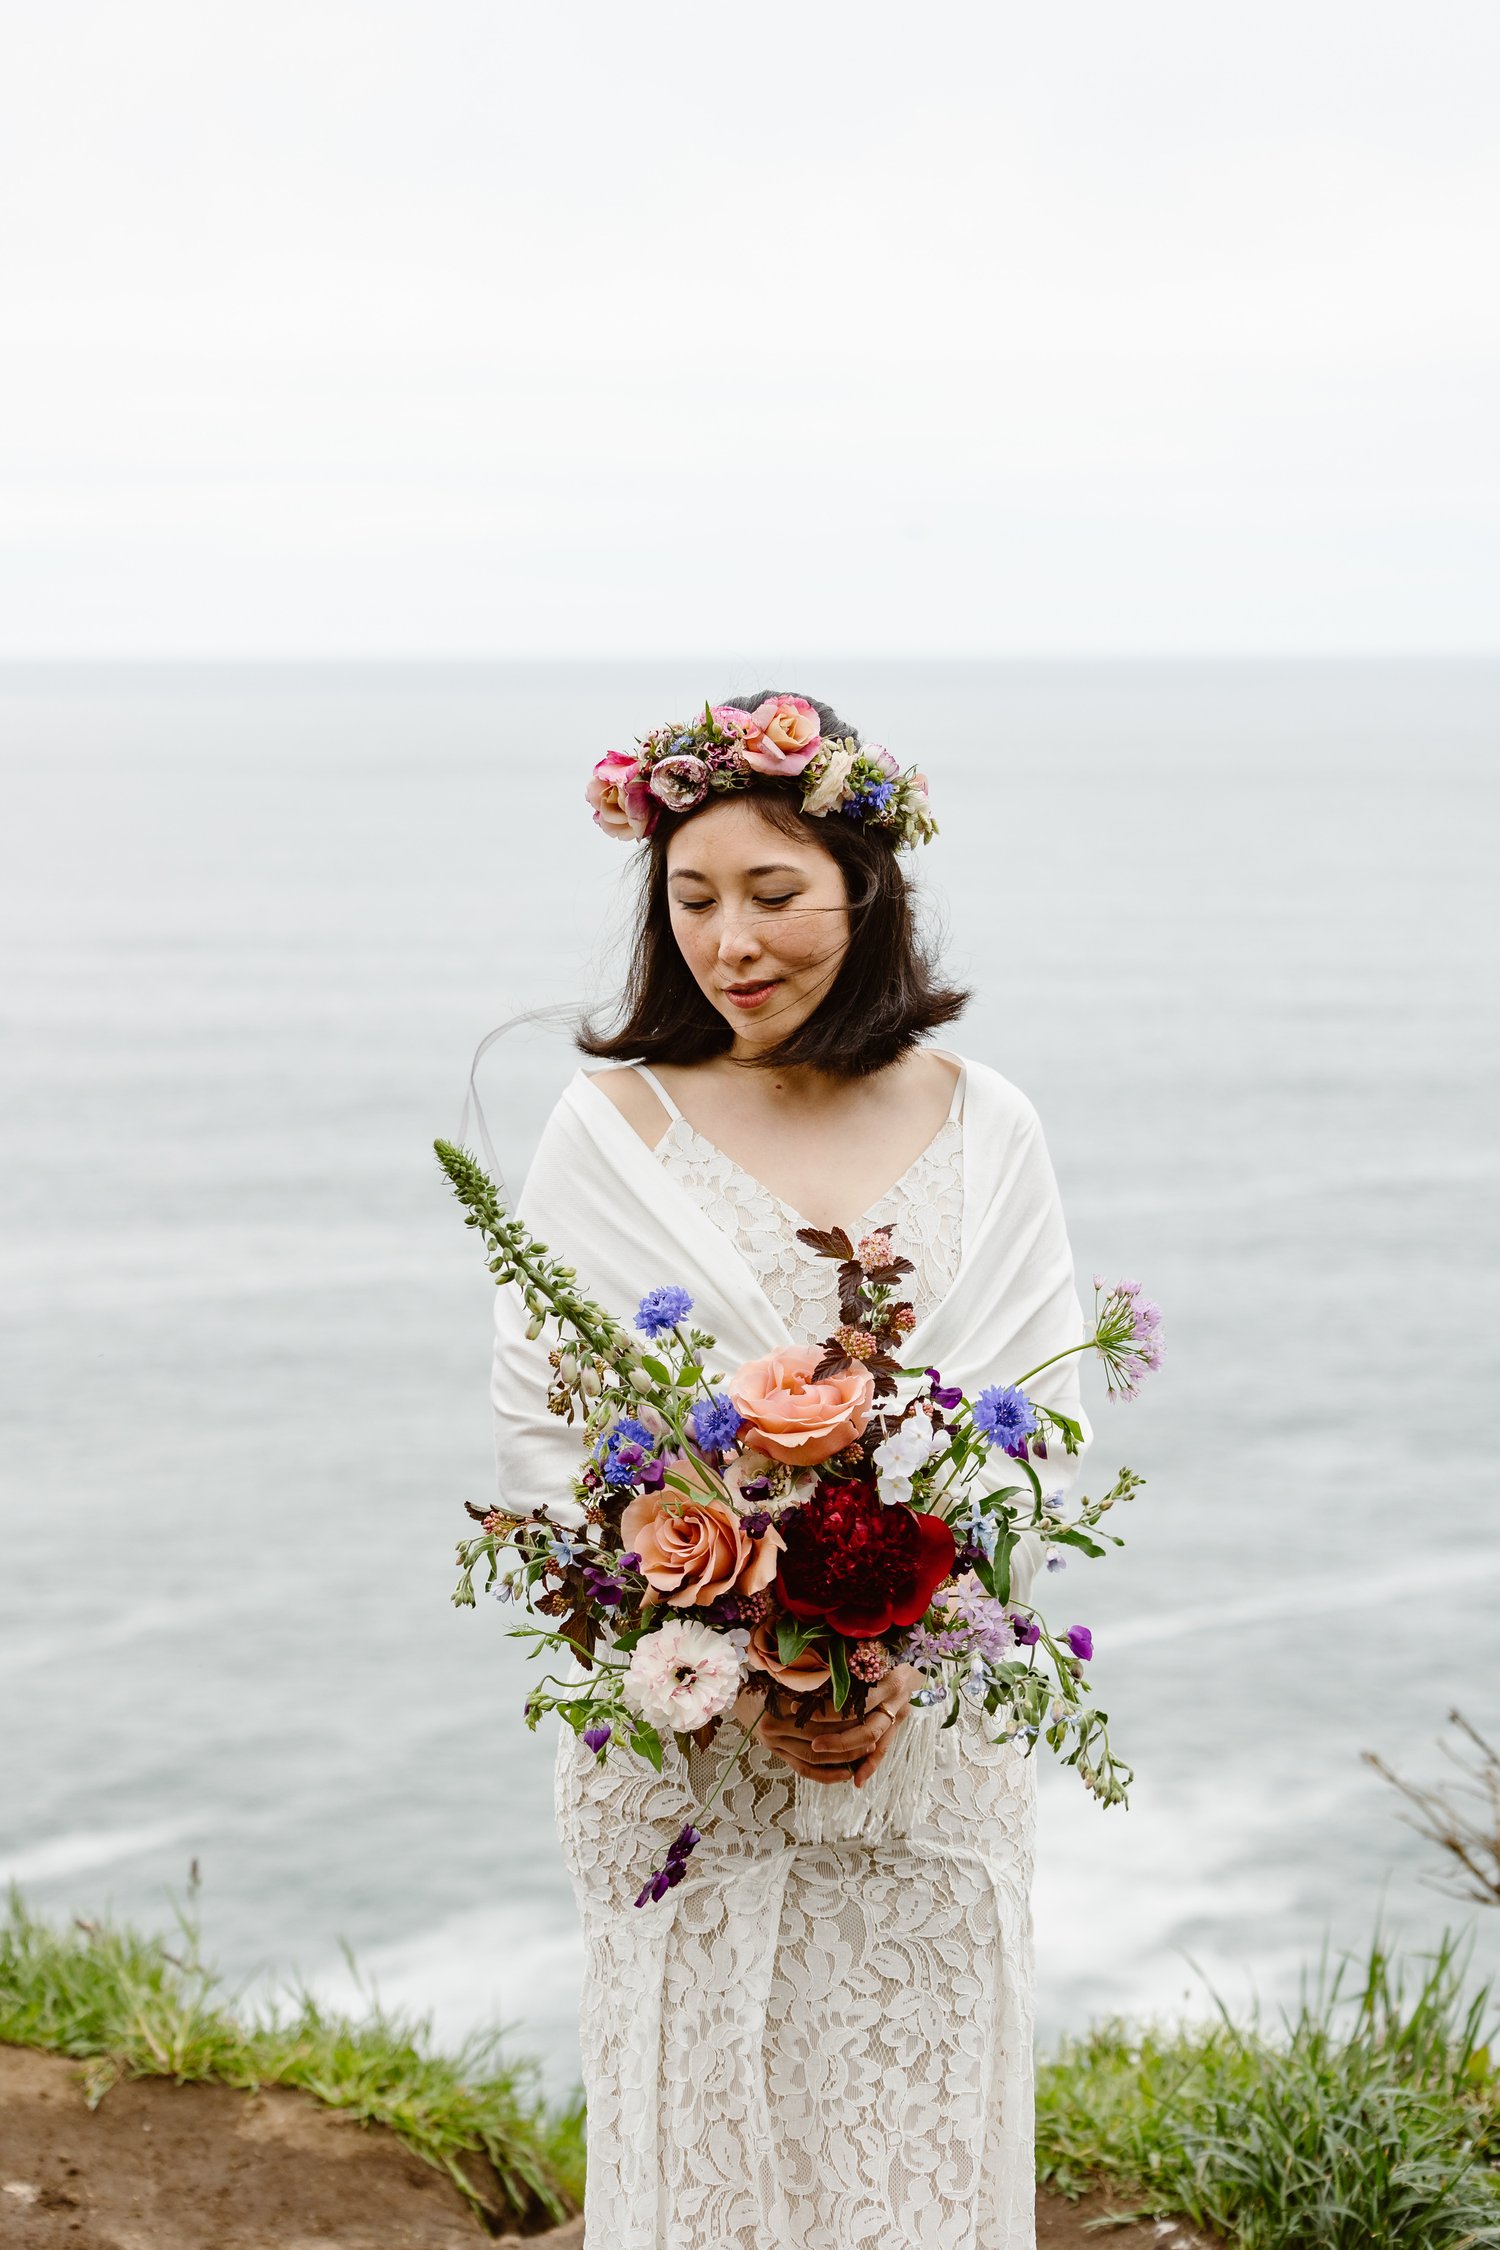 How To Pick The Perfect Elopement Dress - Adventure Elopement Photographer